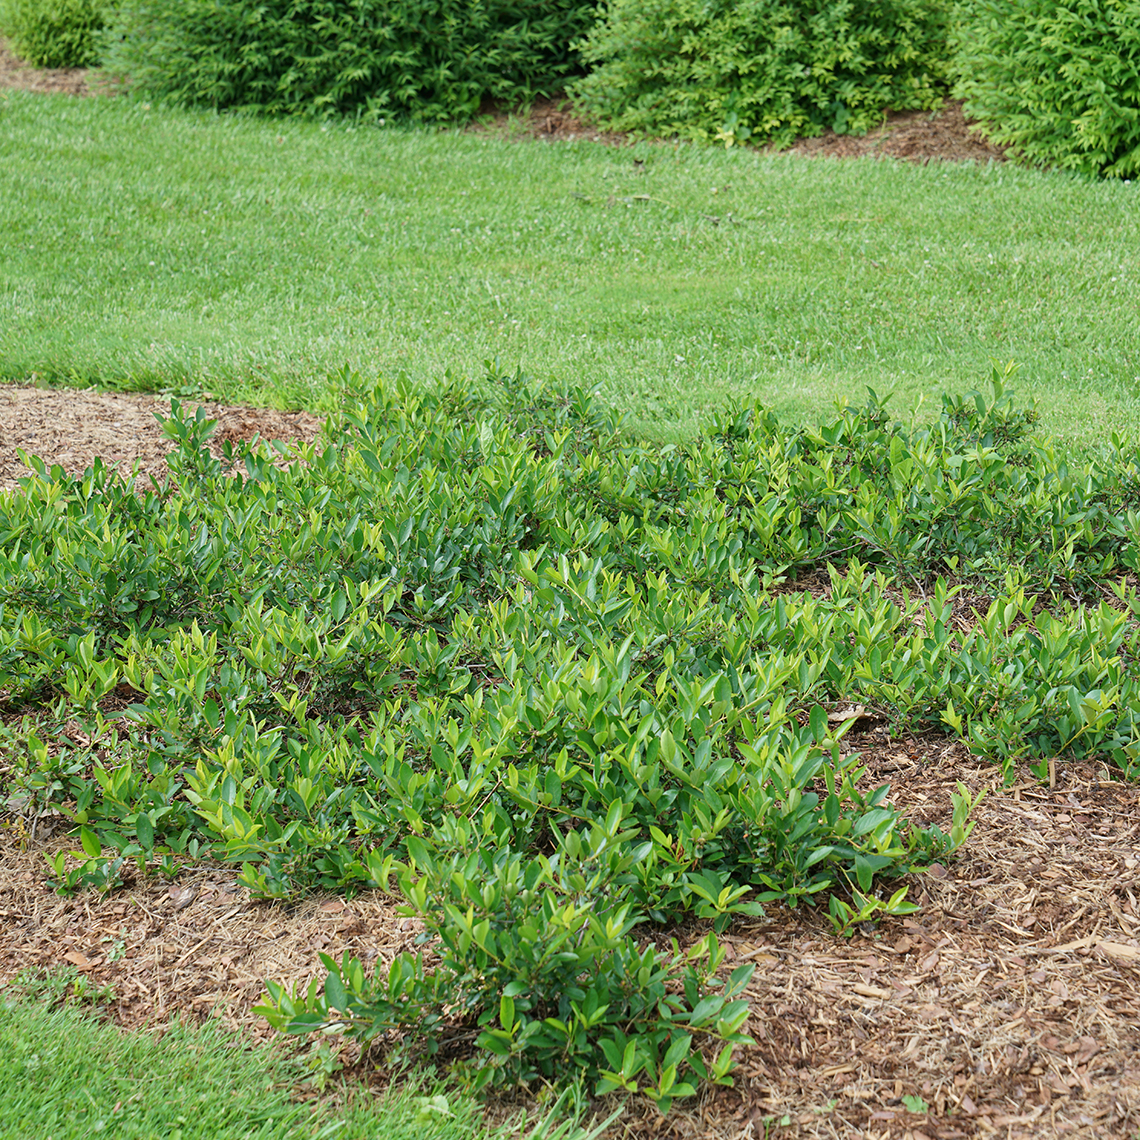 Ground Hug aronia is a durable ground cover shrub ideal for difficult spots